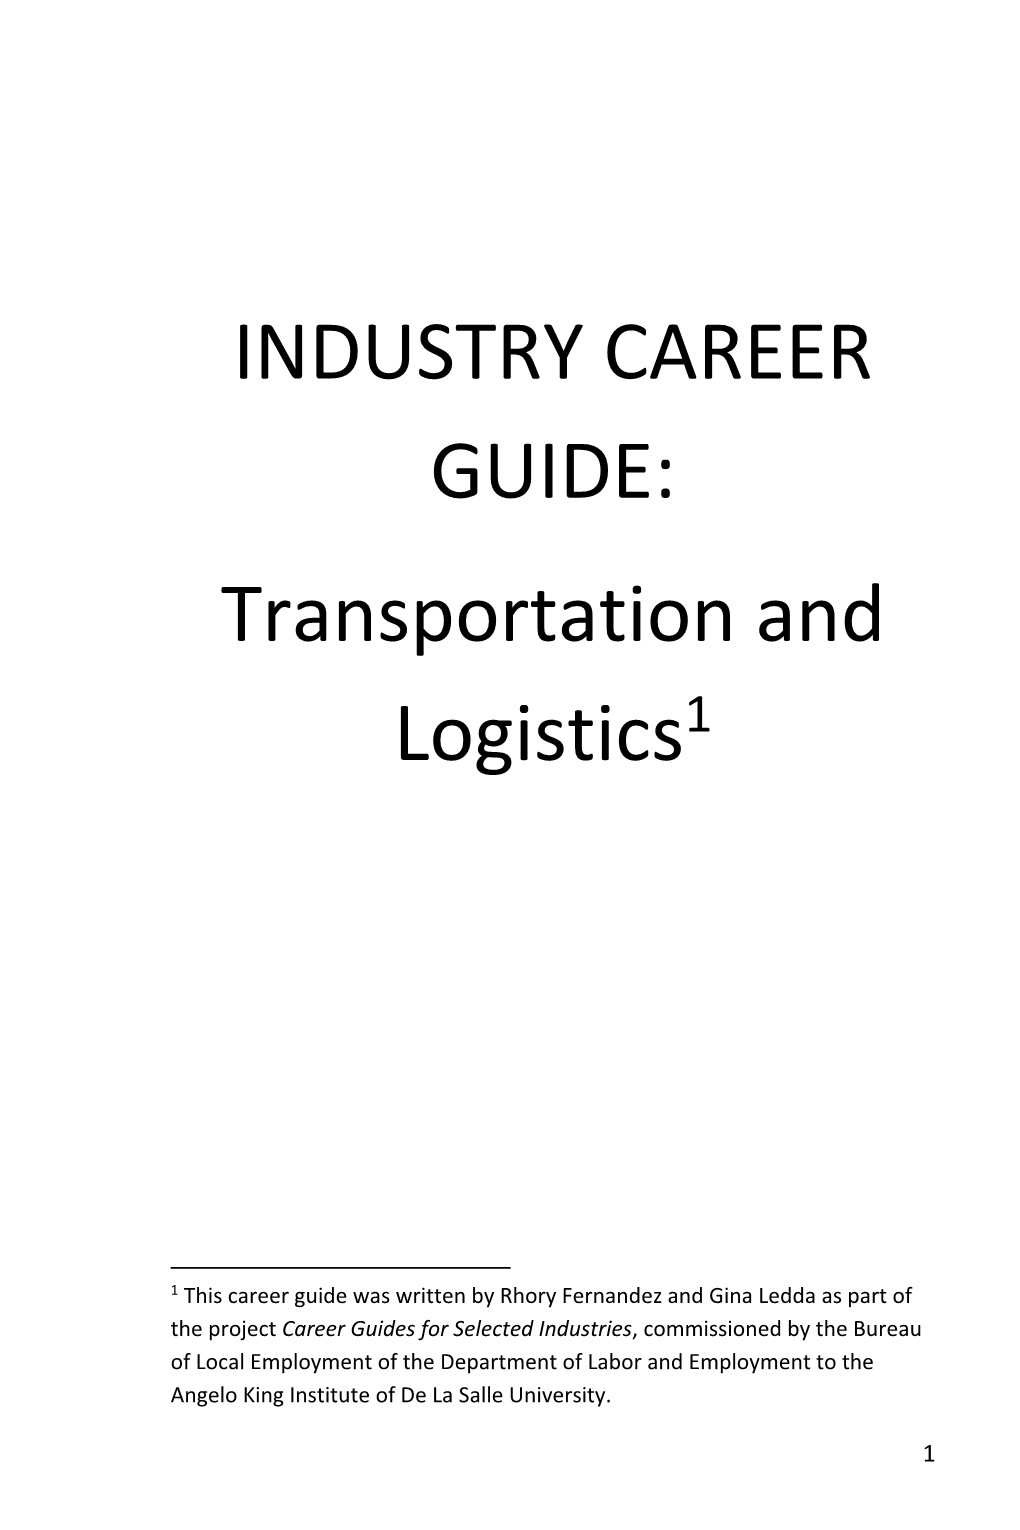 INDUSTRY CAREER GUIDE: Transportation and Logistics1